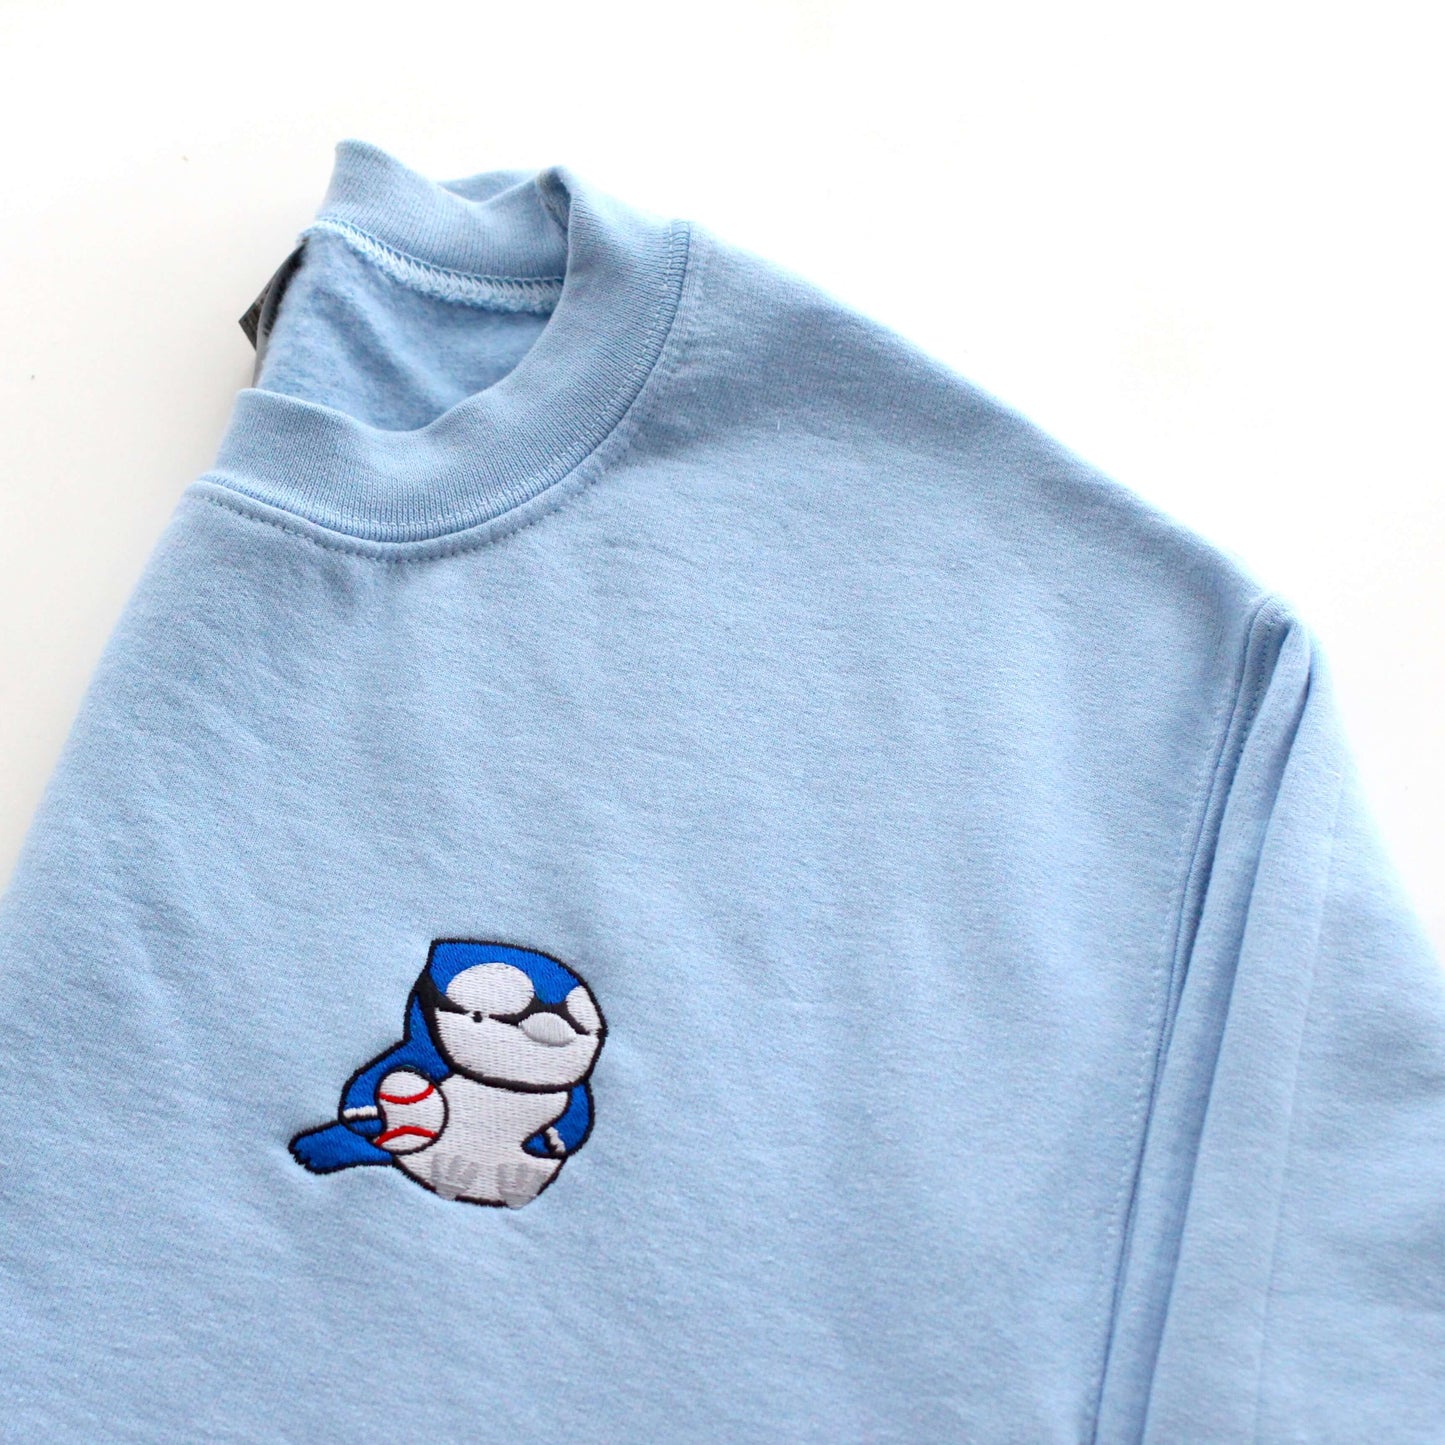 Embroidered Blue Jay Sweatshirt by Wild Whimsy Woolies